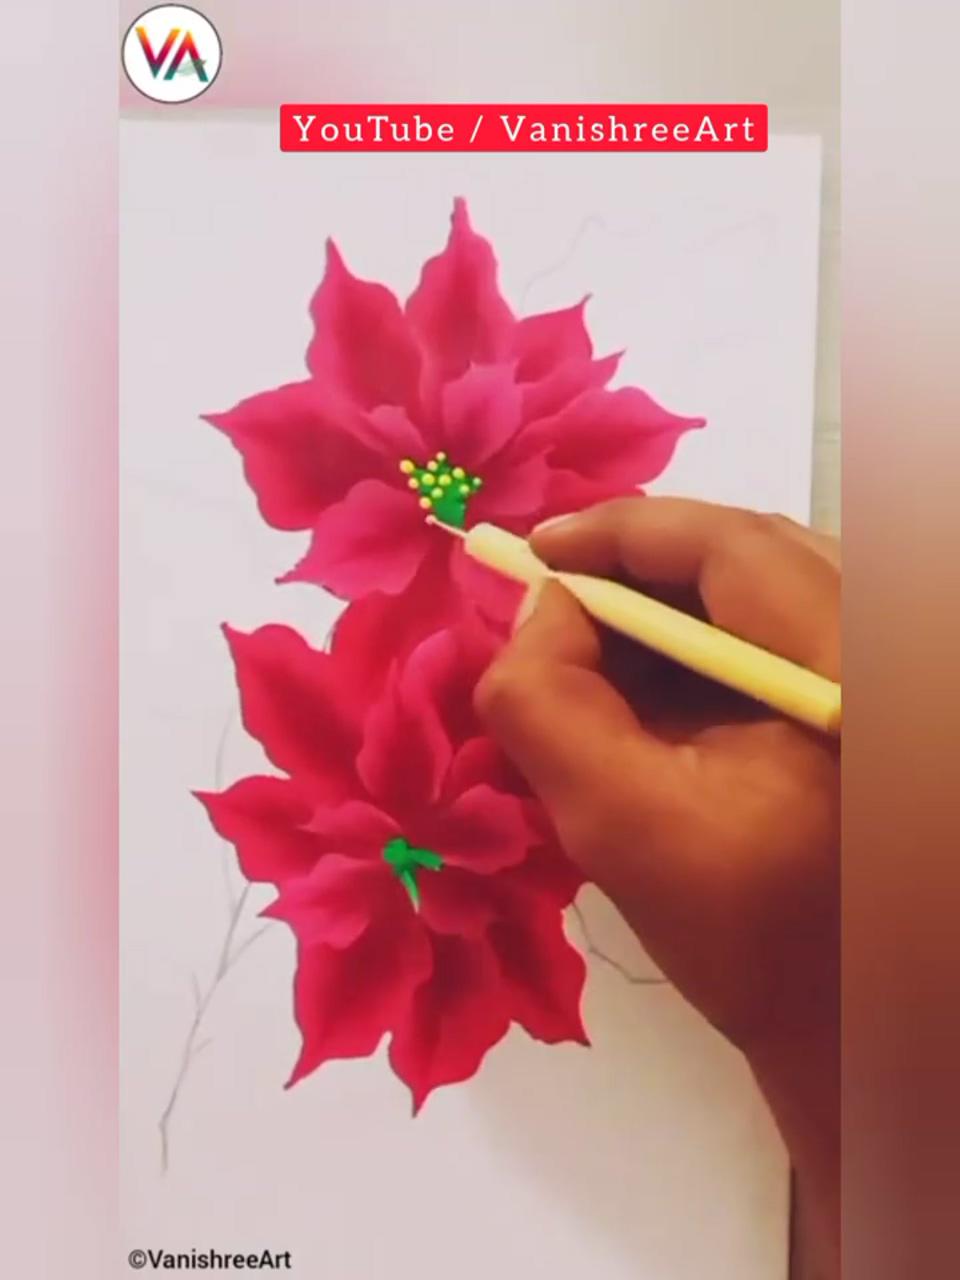 How to paint poinsettia in one stroke acrylic painting tutorial by vanishree art | watercolor paintings tutorials videos